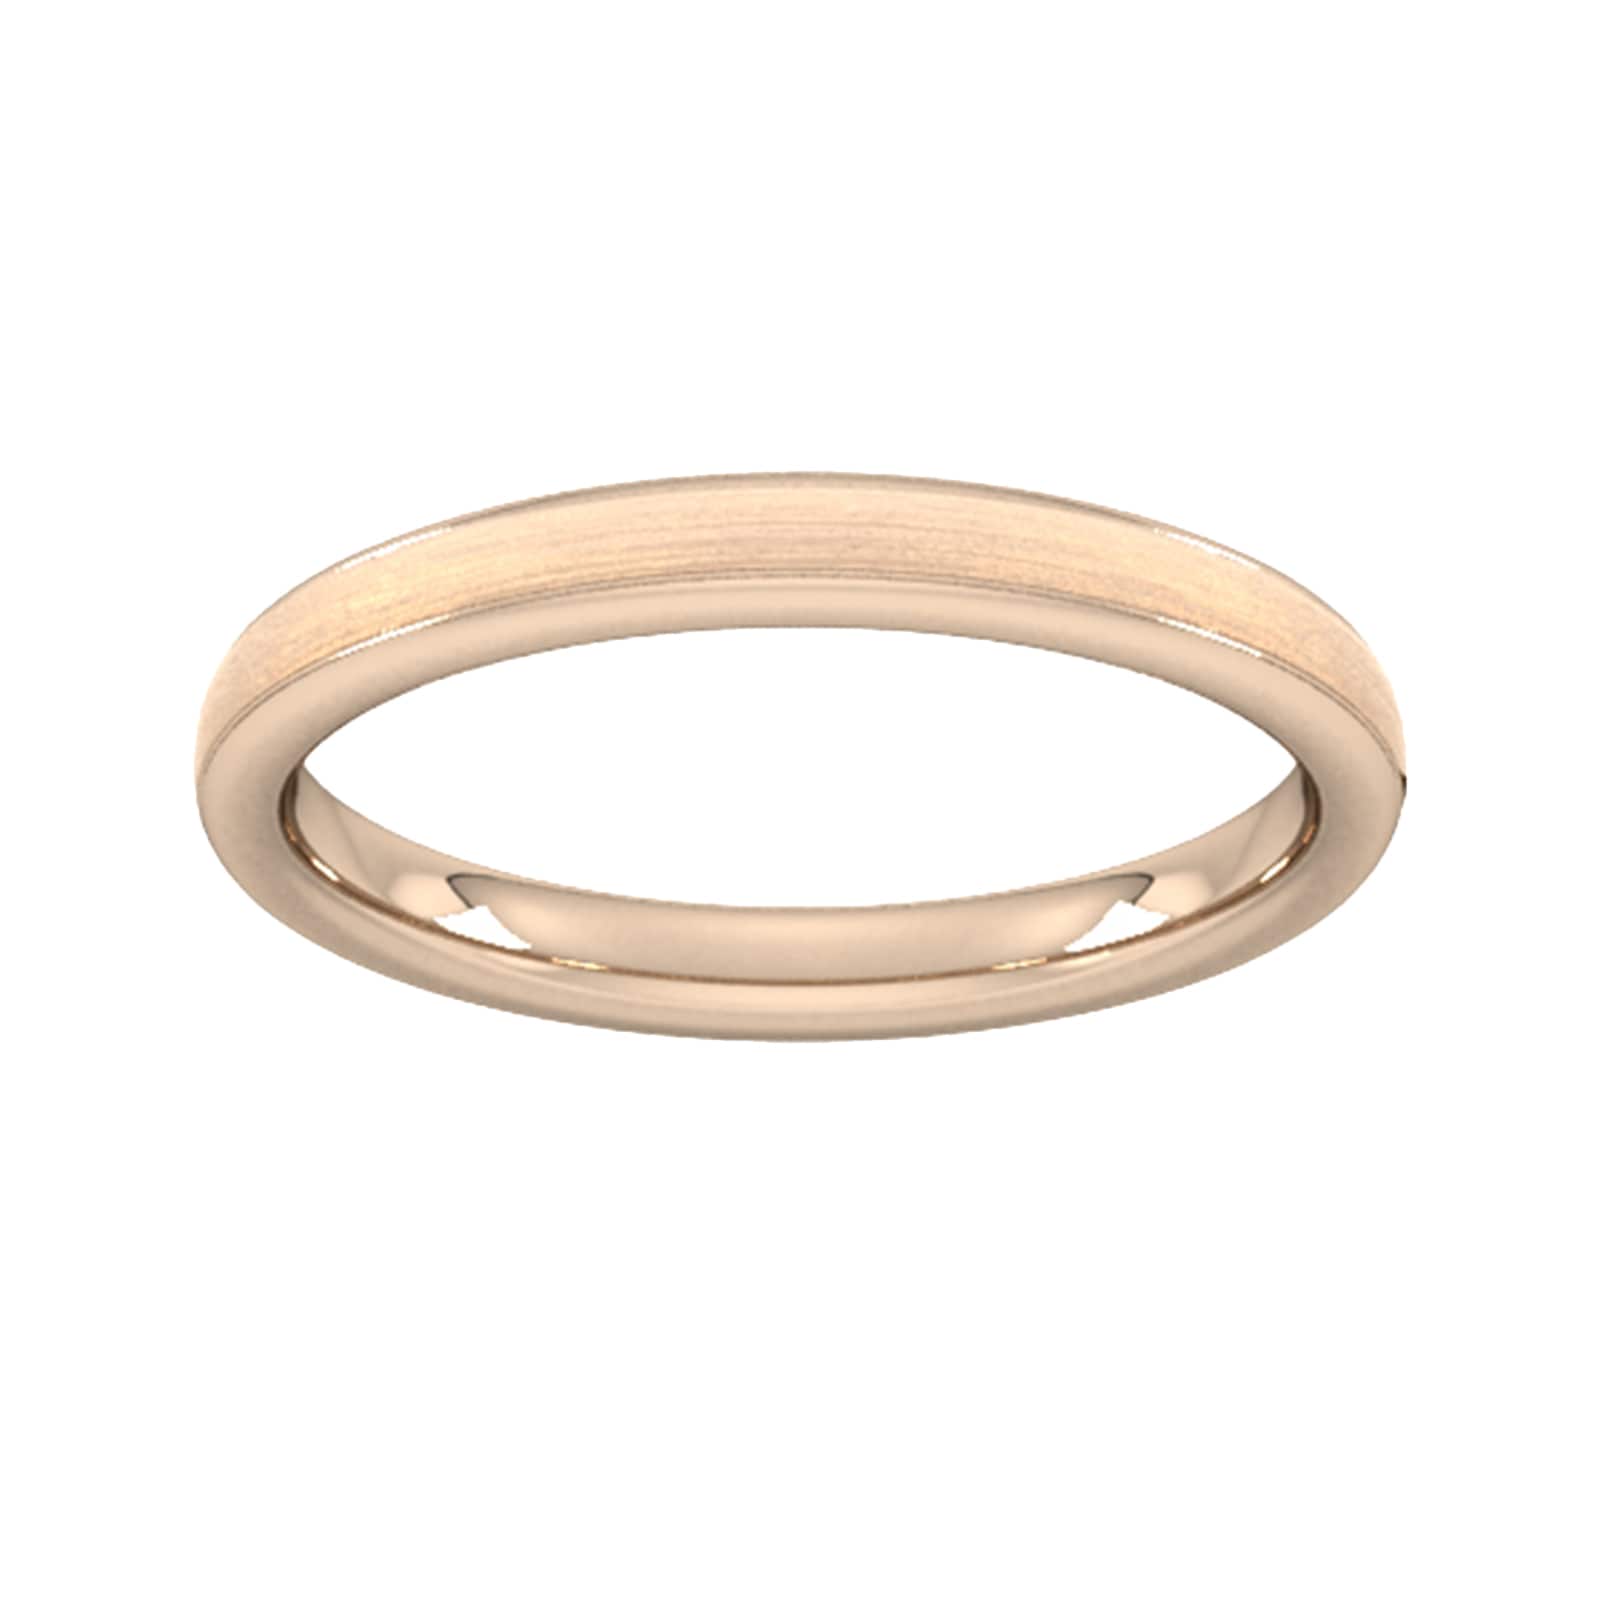 2.5mm Traditional Court Heavy Matt Centre With Grooves Wedding Ring In 9 Carat Rose Gold - Ring Size S